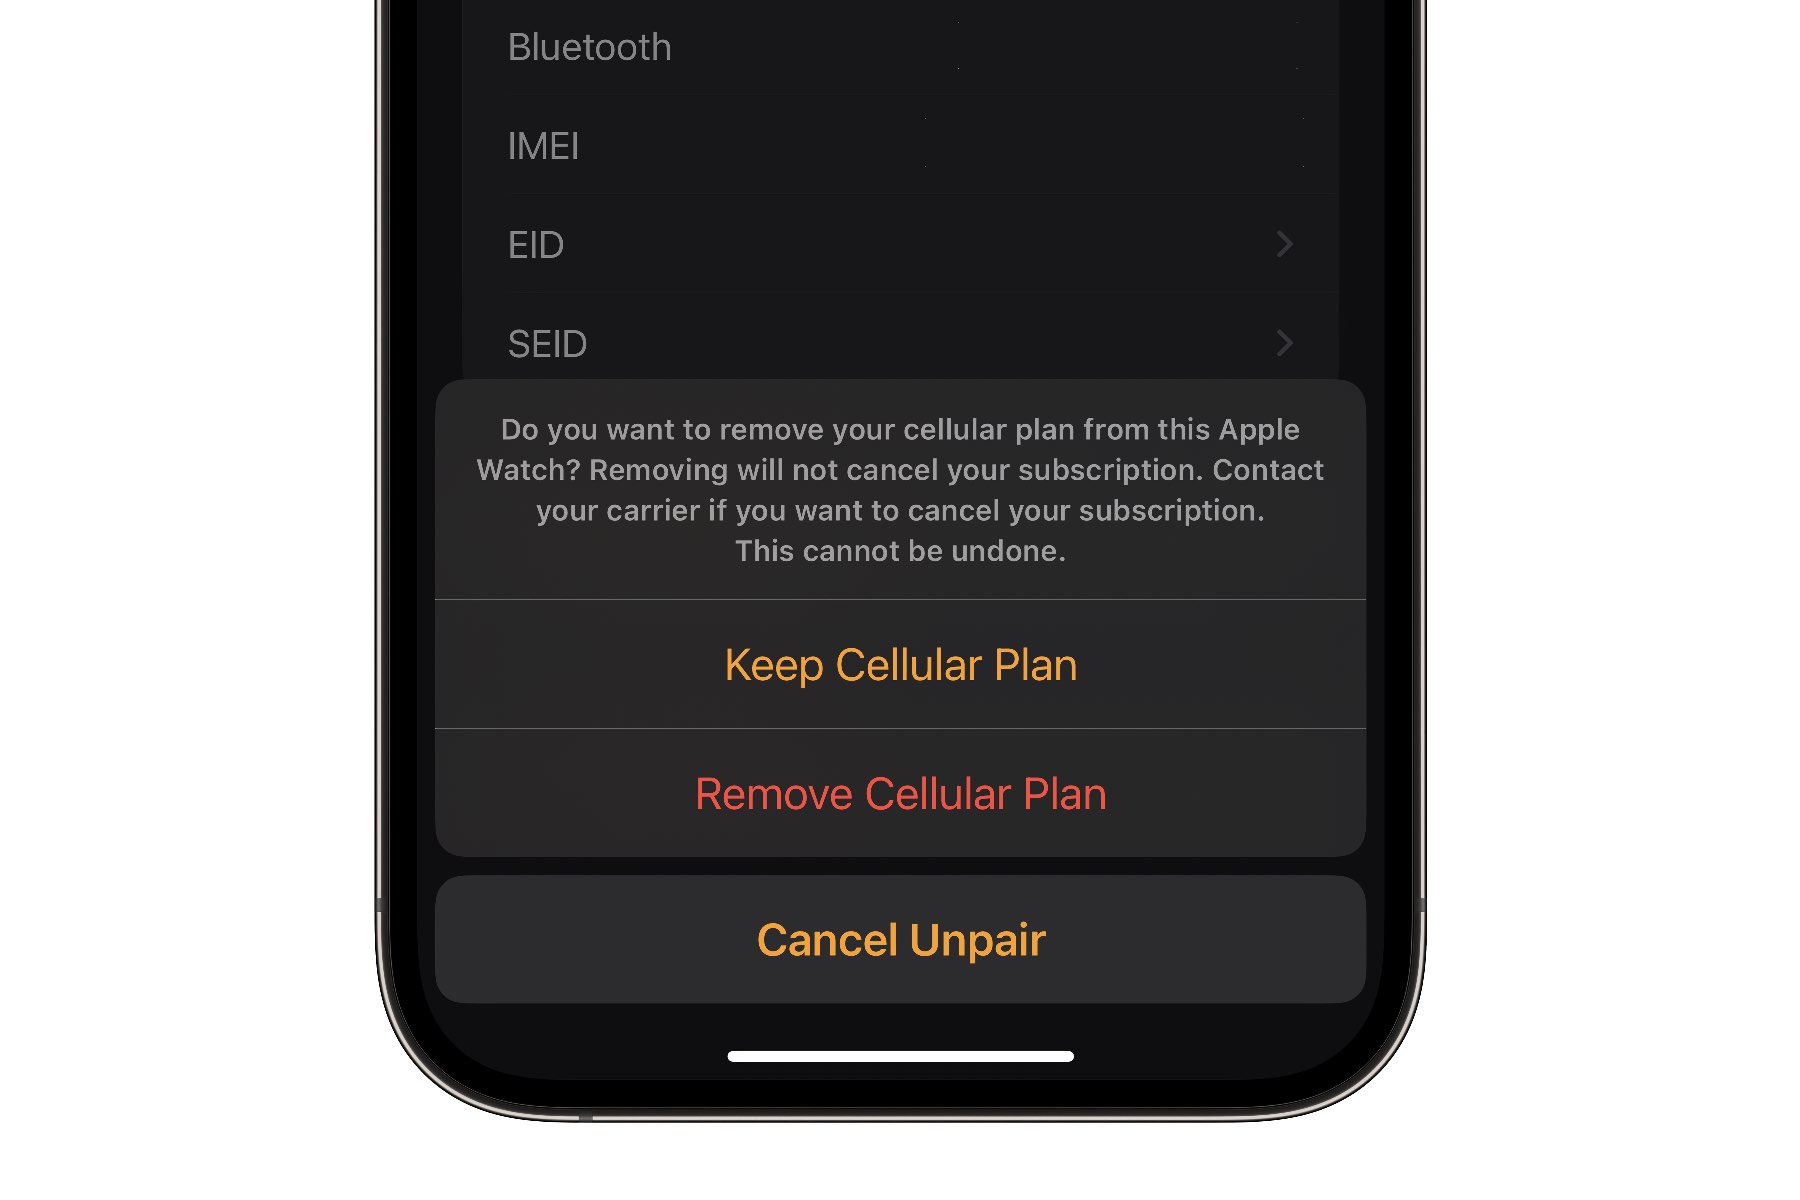 iPhone showing option to Keep or Remove Cellular plan when unpairing Apple Watch.